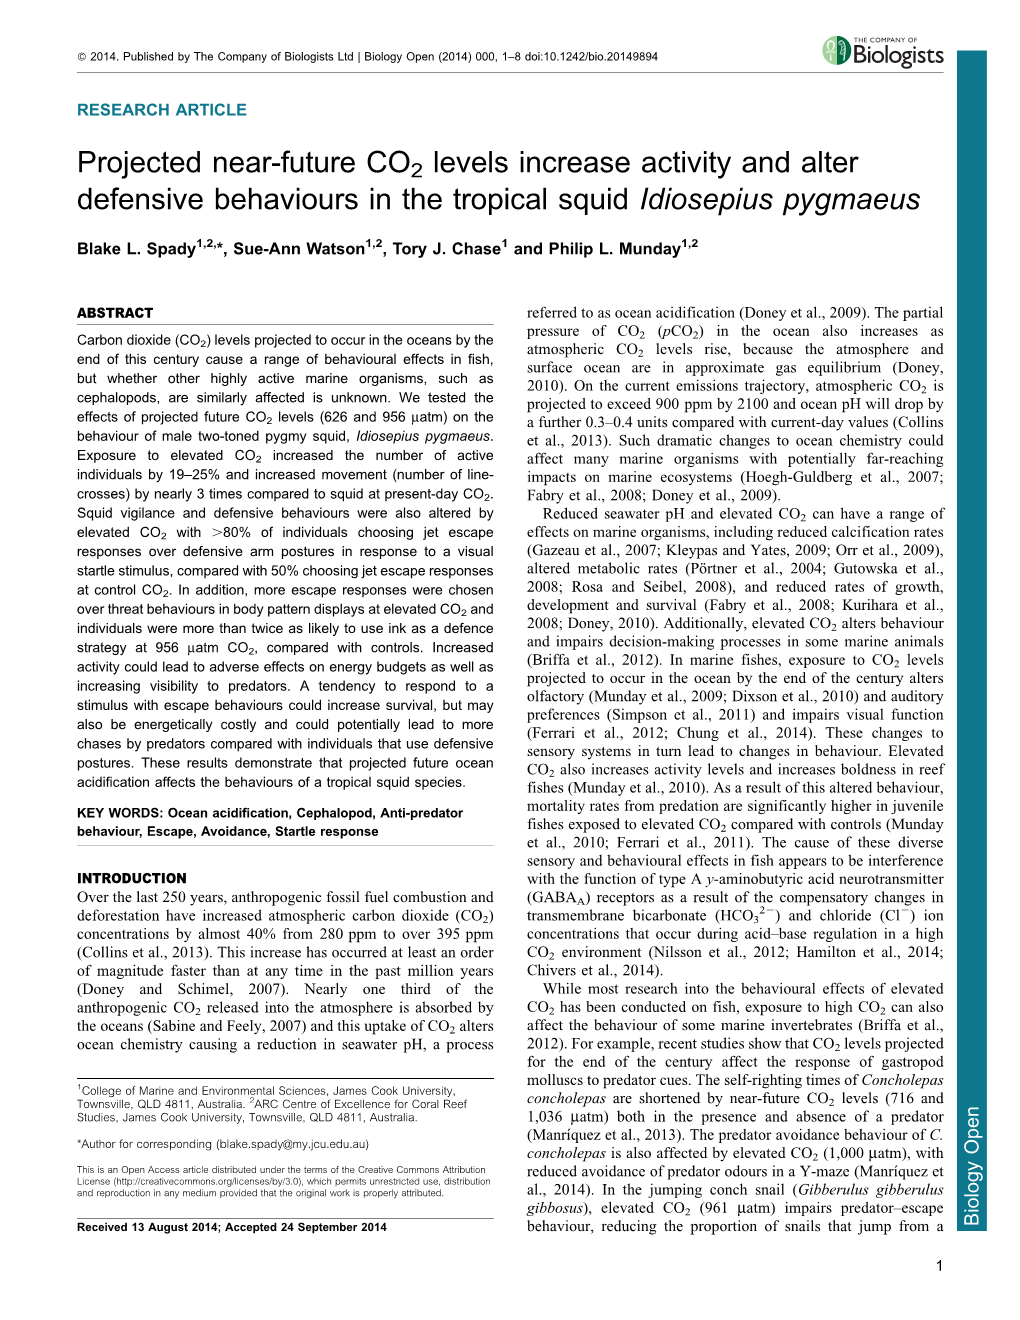 Projected Near-Future CO2 Levels Increase Activity and Alter Defensive Behaviours in the Tropical Squid Idiosepius Pygmaeus